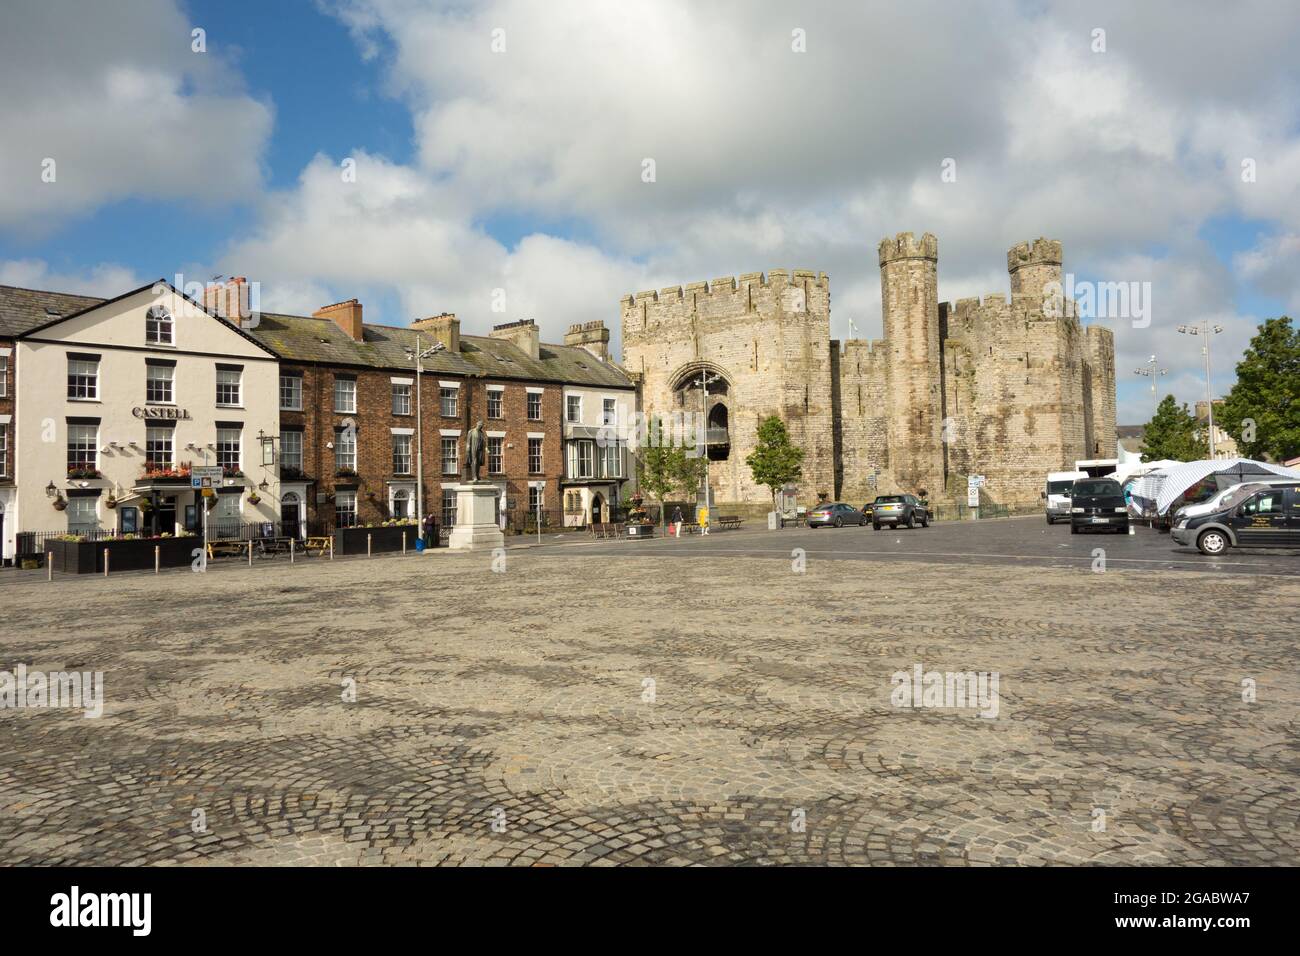 Castle Square Caernarfon Wales with the castle in the background. Stock Photo